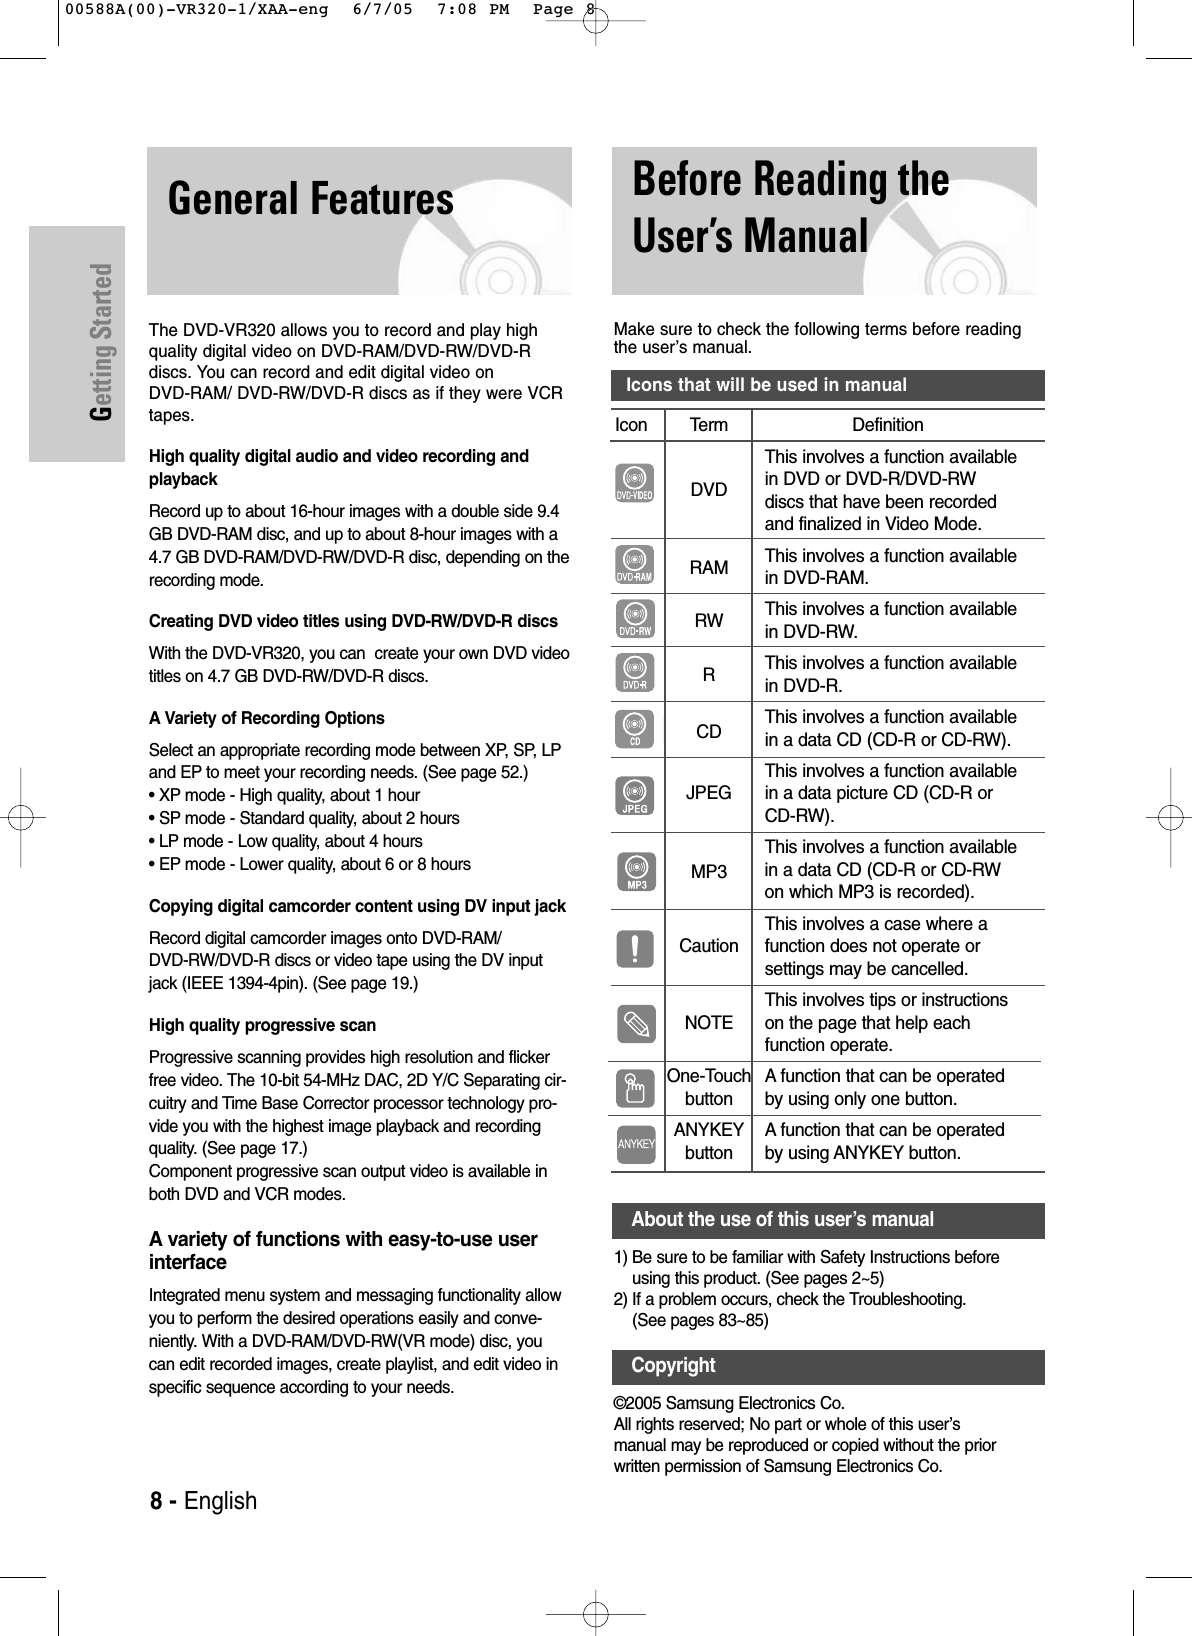 Getting Started8- EnglishBefore Reading theUser’s ManualAbout the use of this user’s manual1) Be sure to be familiar with Safety Instructions beforeusing this product. (See pages 2~5)2) If a problem occurs, check the Troubleshooting. (See pages 83~85)©2005 Samsung Electronics Co.All rights reserved; No part or whole of this user’smanual may be reproduced or copied without the priorwritten permission of Samsung Electronics Co.Make sure to check the following terms before readingthe user’s manual.General FeaturesThe DVD-VR320 allows you to record and play highquality digital video on DVD-RAM/DVD-RW/DVD-Rdiscs. You can record and edit digital video on DVD-RAM/ DVD-RW/DVD-R discs as if they were VCRtapes. High quality digital audio and video recording and playbackRecord up to about 16-hour images with a double side 9.4GB DVD-RAM disc, and up to about 8-hour images with a4.7 GB DVD-RAM/DVD-RW/DVD-R disc, depending on therecording mode.Creating DVD video titles using DVD-RW/DVD-R discsWith the DVD-VR320, you can  create your own DVD videotitles on 4.7 GB DVD-RW/DVD-R discs.AVariety of Recording OptionsSelect an appropriate recording mode between XP, SP, LPand EP to meet your recording needs. (See page 52.) • XP mode - High quality, about 1 hour• SP mode - Standard quality, about 2 hours• LP mode - Low quality, about 4 hours• EP mode - Lower quality, about 6 or 8 hoursCopying digital camcorder content using DV input jackRecord digital camcorder images onto DVD-RAM/DVD-RW/DVD-R discs or video tape using the DV inputjack (IEEE 1394-4pin). (See page 19.)High quality progressive scanProgressive scanning provides high resolution and flickerfree video. The 10-bit 54-MHz DAC, 2D Y/C Separating cir-cuitry and Time Base Corrector processor technology pro-vide you with the highest image playback and recordingquality. (See page 17.)Component progressive scan output video is available inboth DVD and VCR modes. Avariety of functions with easy-to-use userinterfaceIntegrated menu system and messaging functionality allowyou to perform the desired operations easily and conve-niently. With a DVD-RAM/DVD-RW(VR mode) disc, youcan edit recorded images, create playlist, and edit video inspecific sequence according to your needs.CopyrightIcons that will be used in manualIcon Term DefinitionThis involves a function available DVD in DVD or DVD-R/DVD-RW discs that have been recorded and finalized in Video Mode.This involves a function available RAM in DVD-RAM.This involves a function available RW in DVD-RW.This involves a function available Rin DVD-R.CD This involves a function available in a data CD (CD-R or CD-RW).This involves a function available JPEG in a data picture CD (CD-R or CD-RW).This involves a function available MP3 in a data CD (CD-R or CD-RWon which MP3 is recorded).This involves a case where a Caution function does not operate or settings may be cancelled.This involves tips or instructions NOTE on the page that help eachfunction operate.  One-Touch A function that can be operatedbutton by using only one button.ANYKEY A function that can be operated button by using ANYKEY button.00588A(00)-VR320-1/XAA-eng  6/7/05  7:08 PM  Page 8